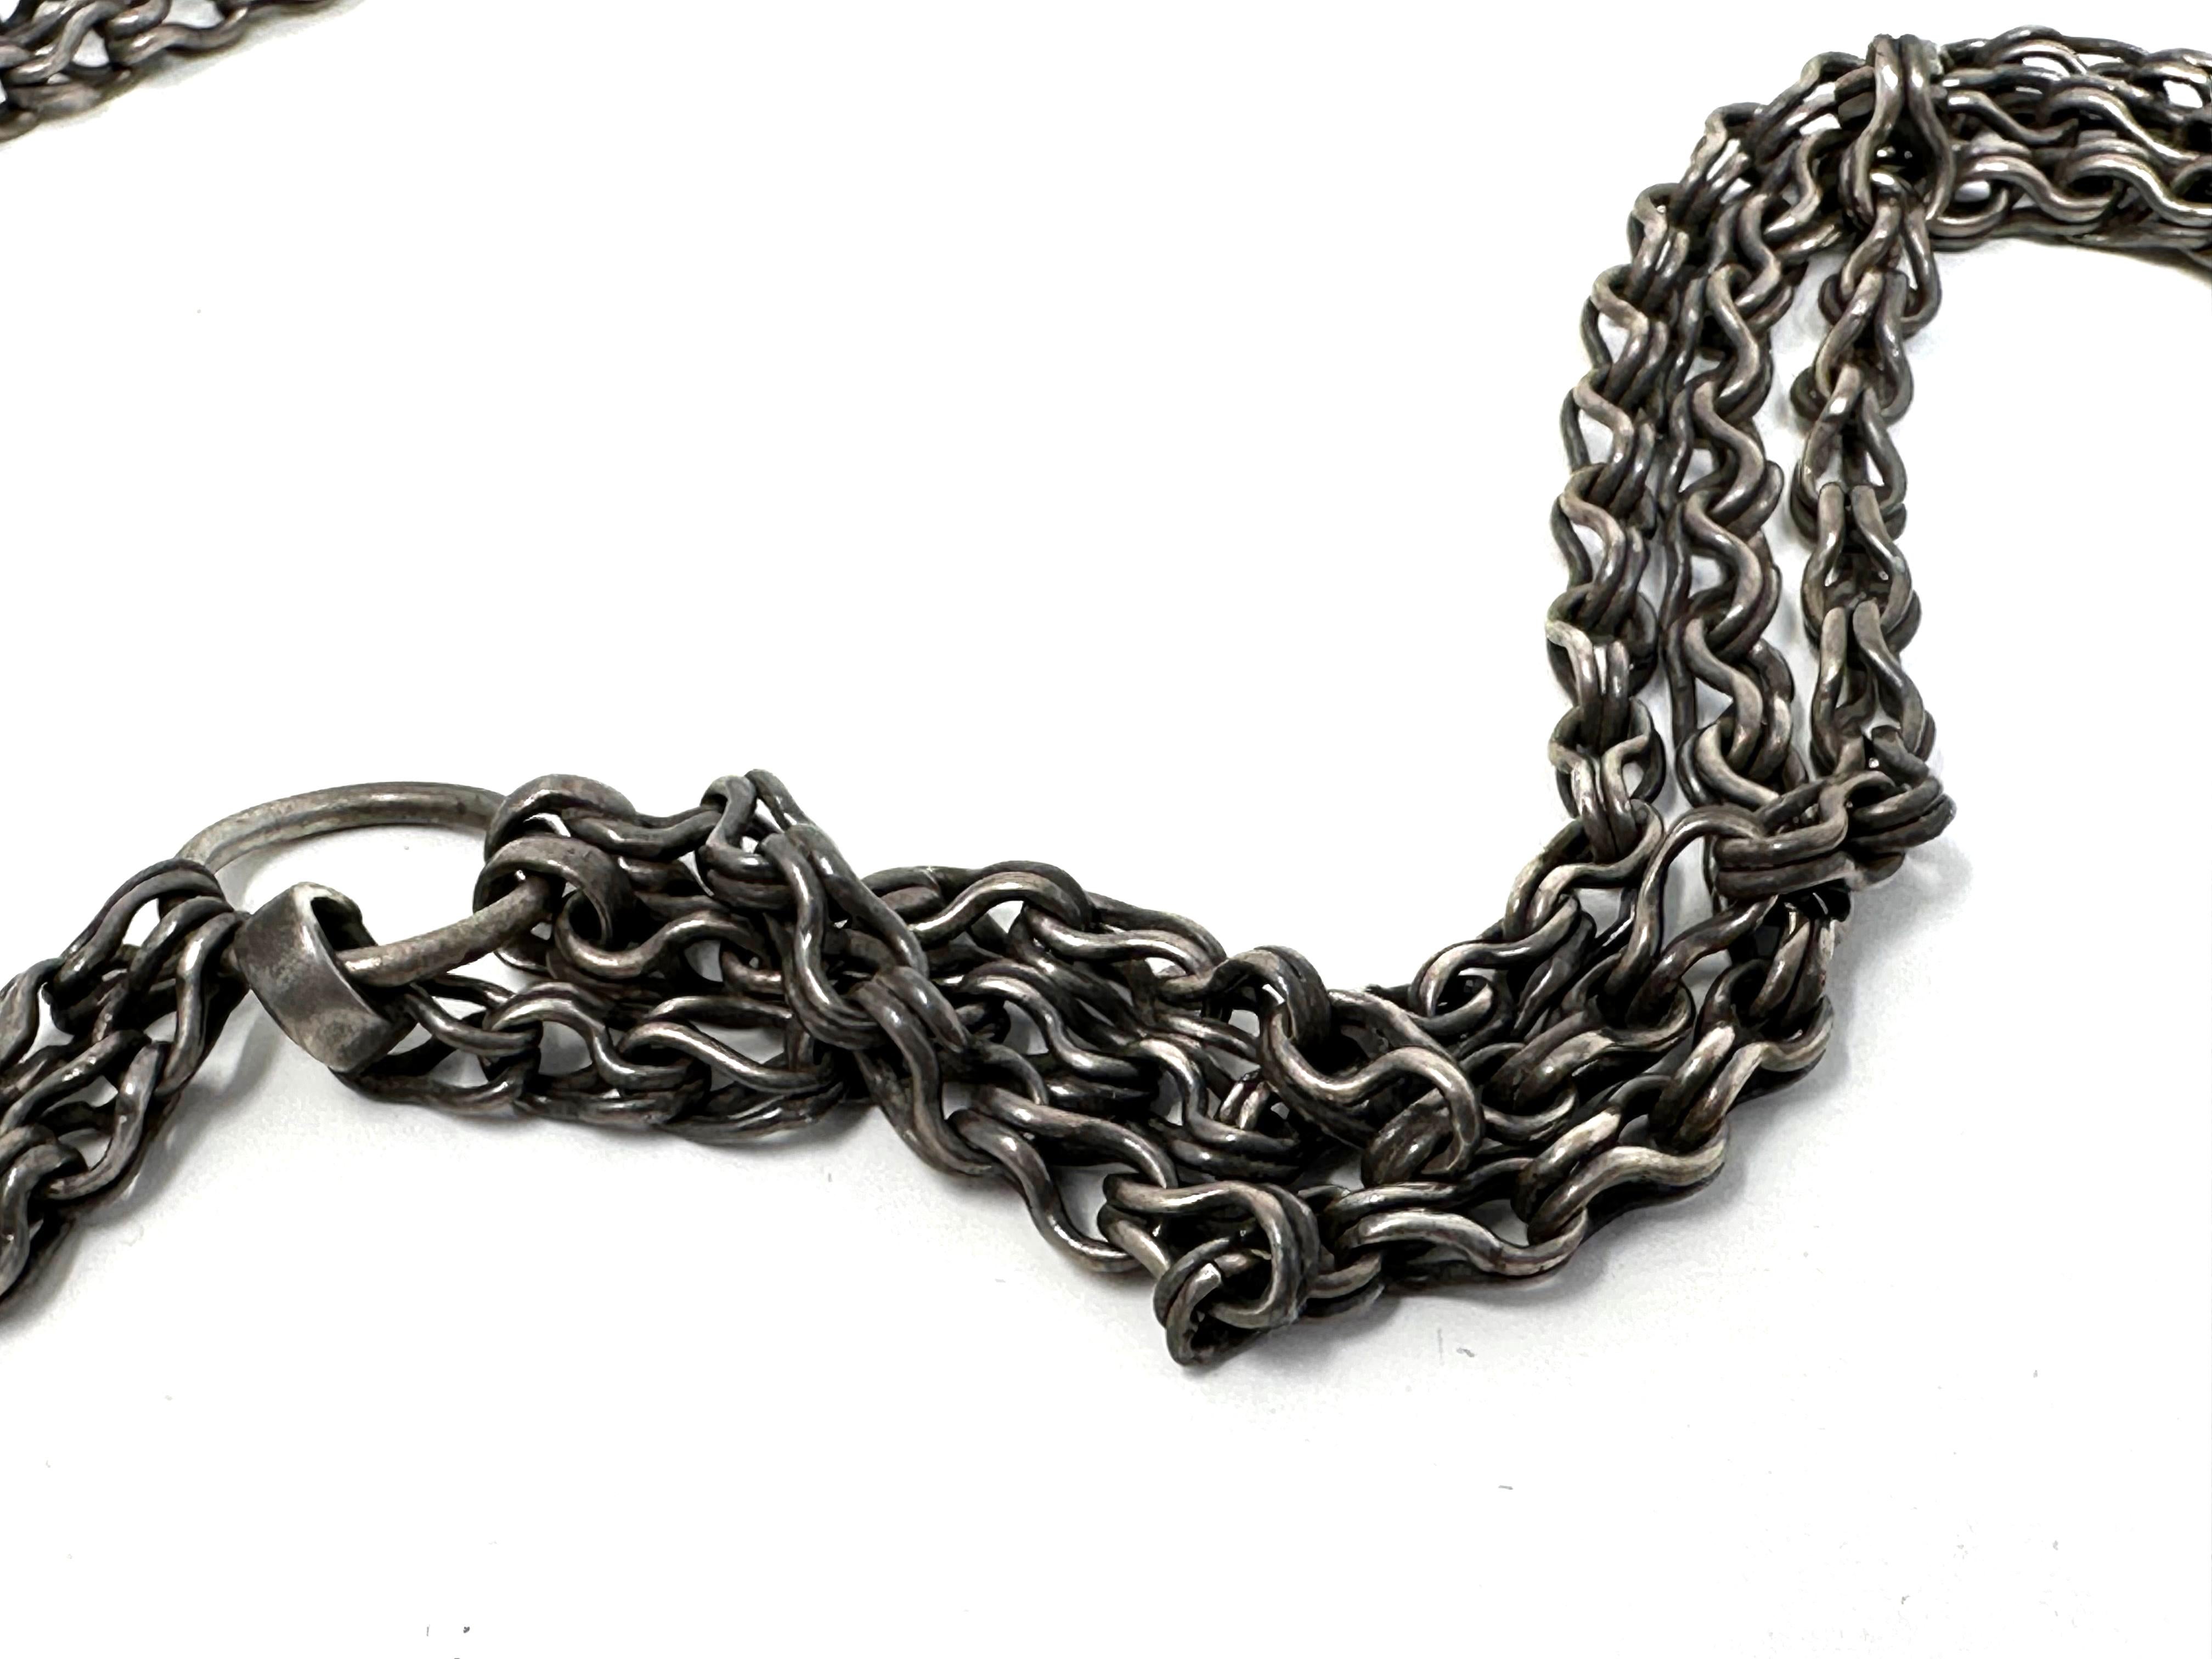 Empire EARLY 1900’s Tribal MUGHAL EAST INDIAN OLD SILVER Chain and Pendant NECKLACE For Sale